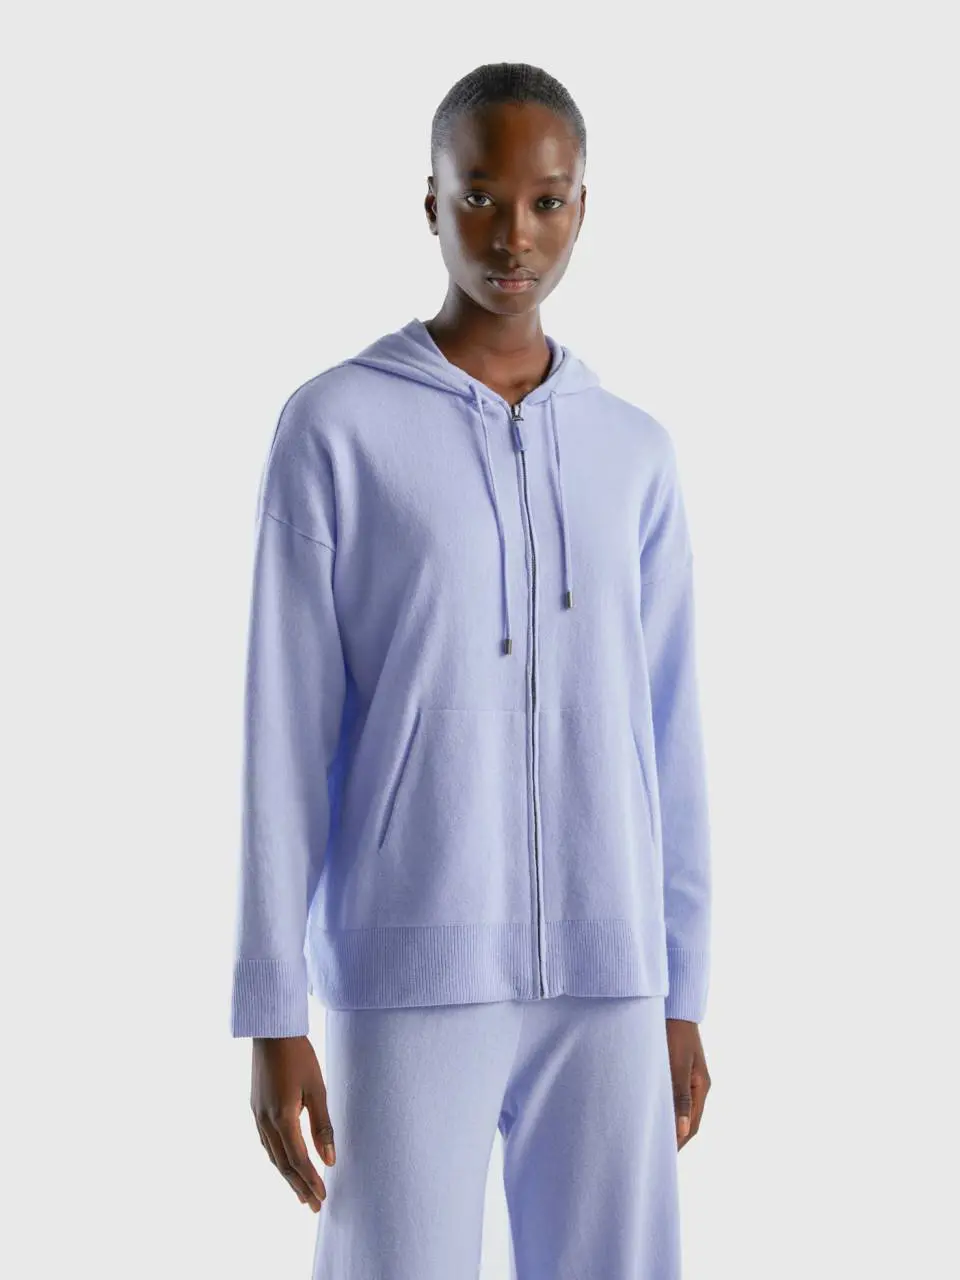 Benetton light blue sweater in cashmere blend with hood. 1